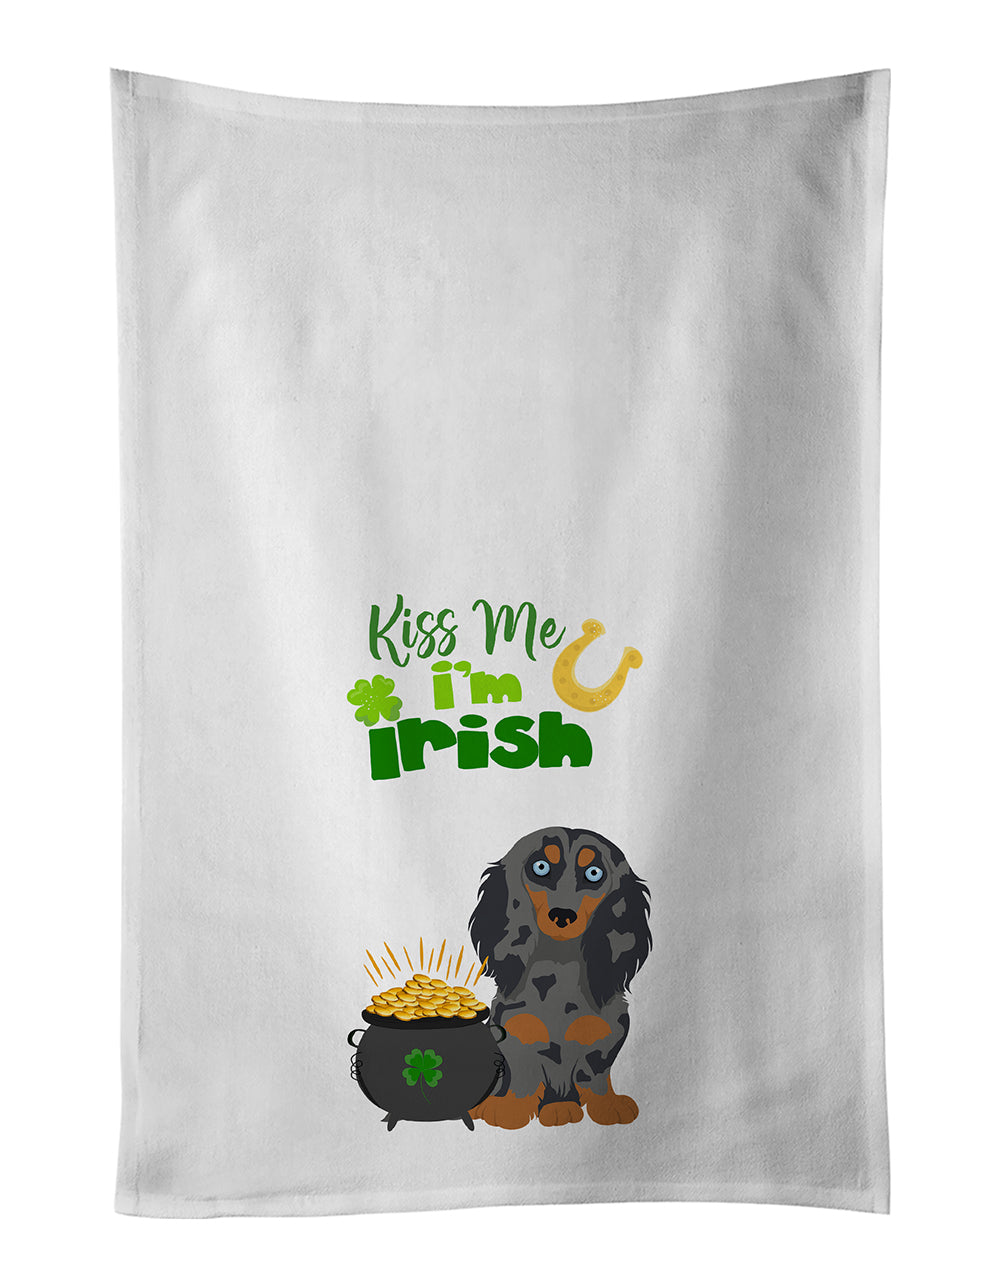 Buy this Longhair Blue and Tan Dapple Dachshund St. Patrick's Day White Kitchen Towel Set of 2 Dish Towels